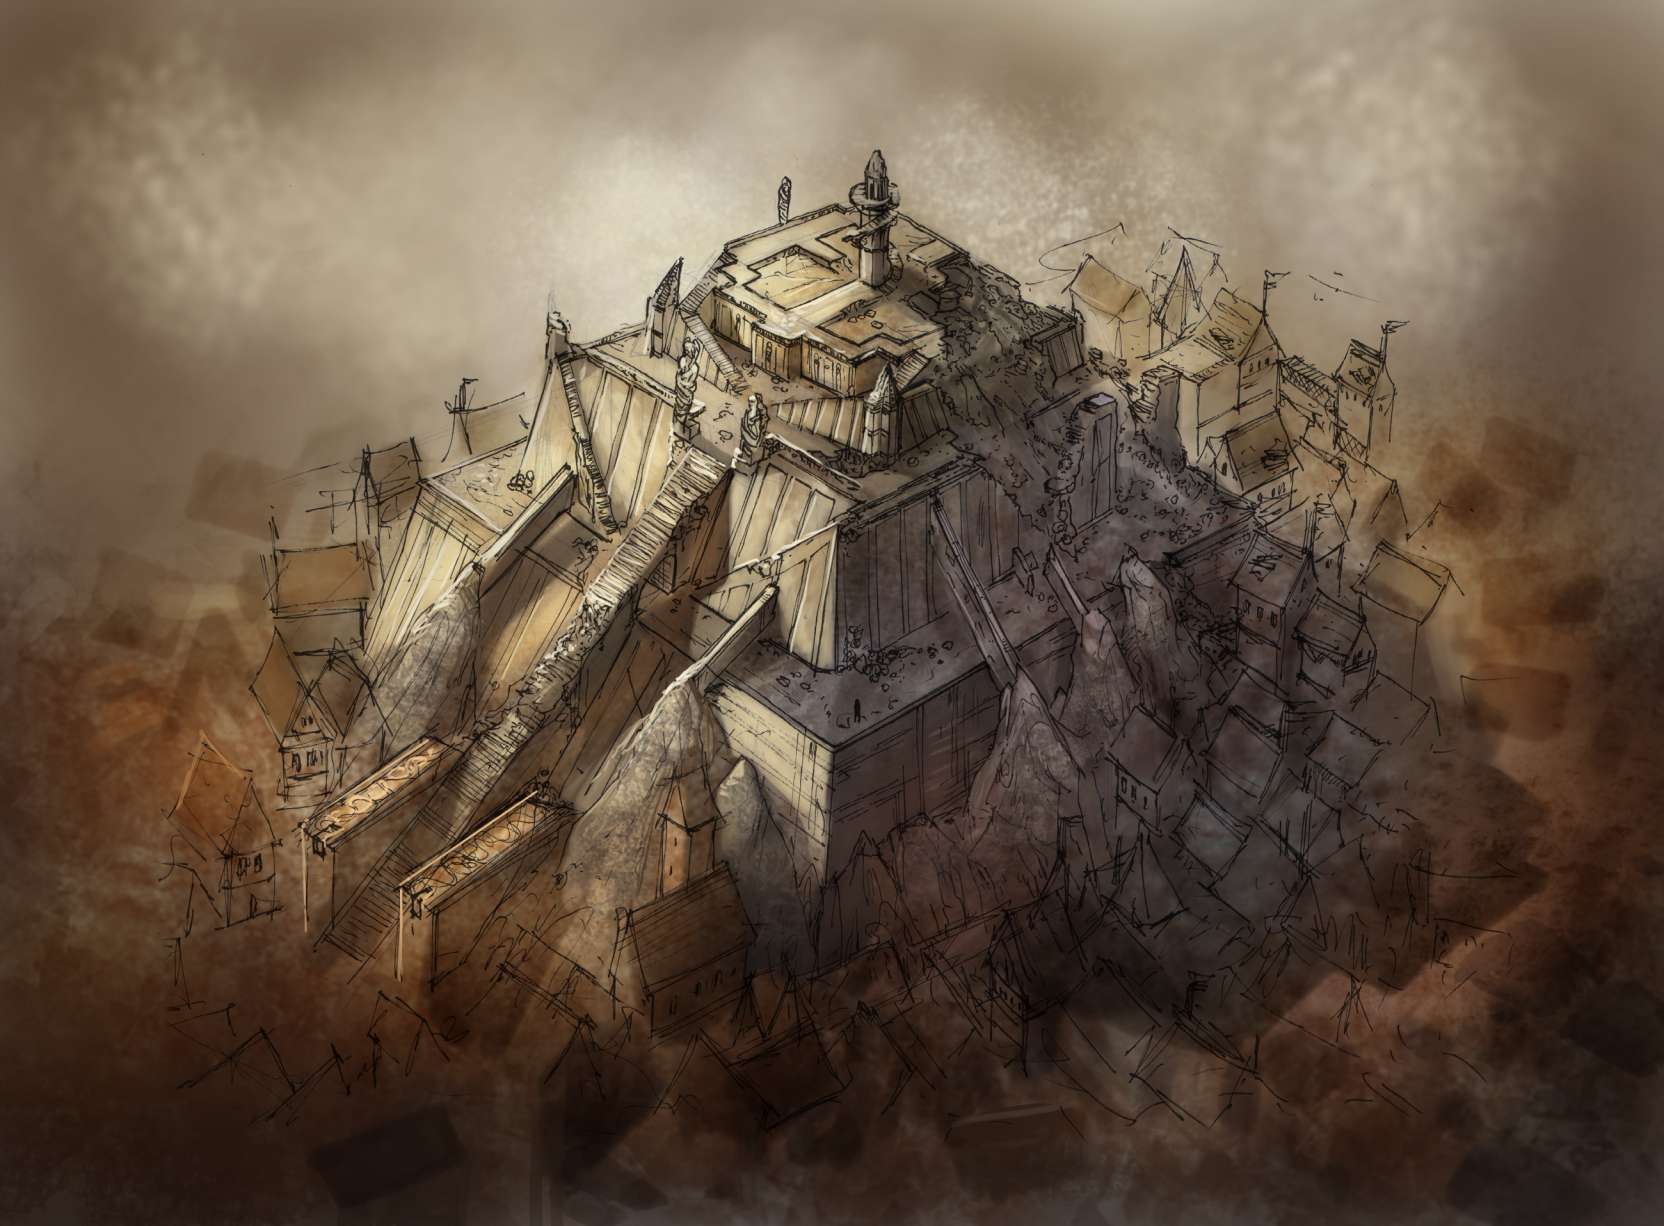 Top image: Concept-art of a ziggurat done for Sintel, 3rd open-movie of the Blender Foundation.